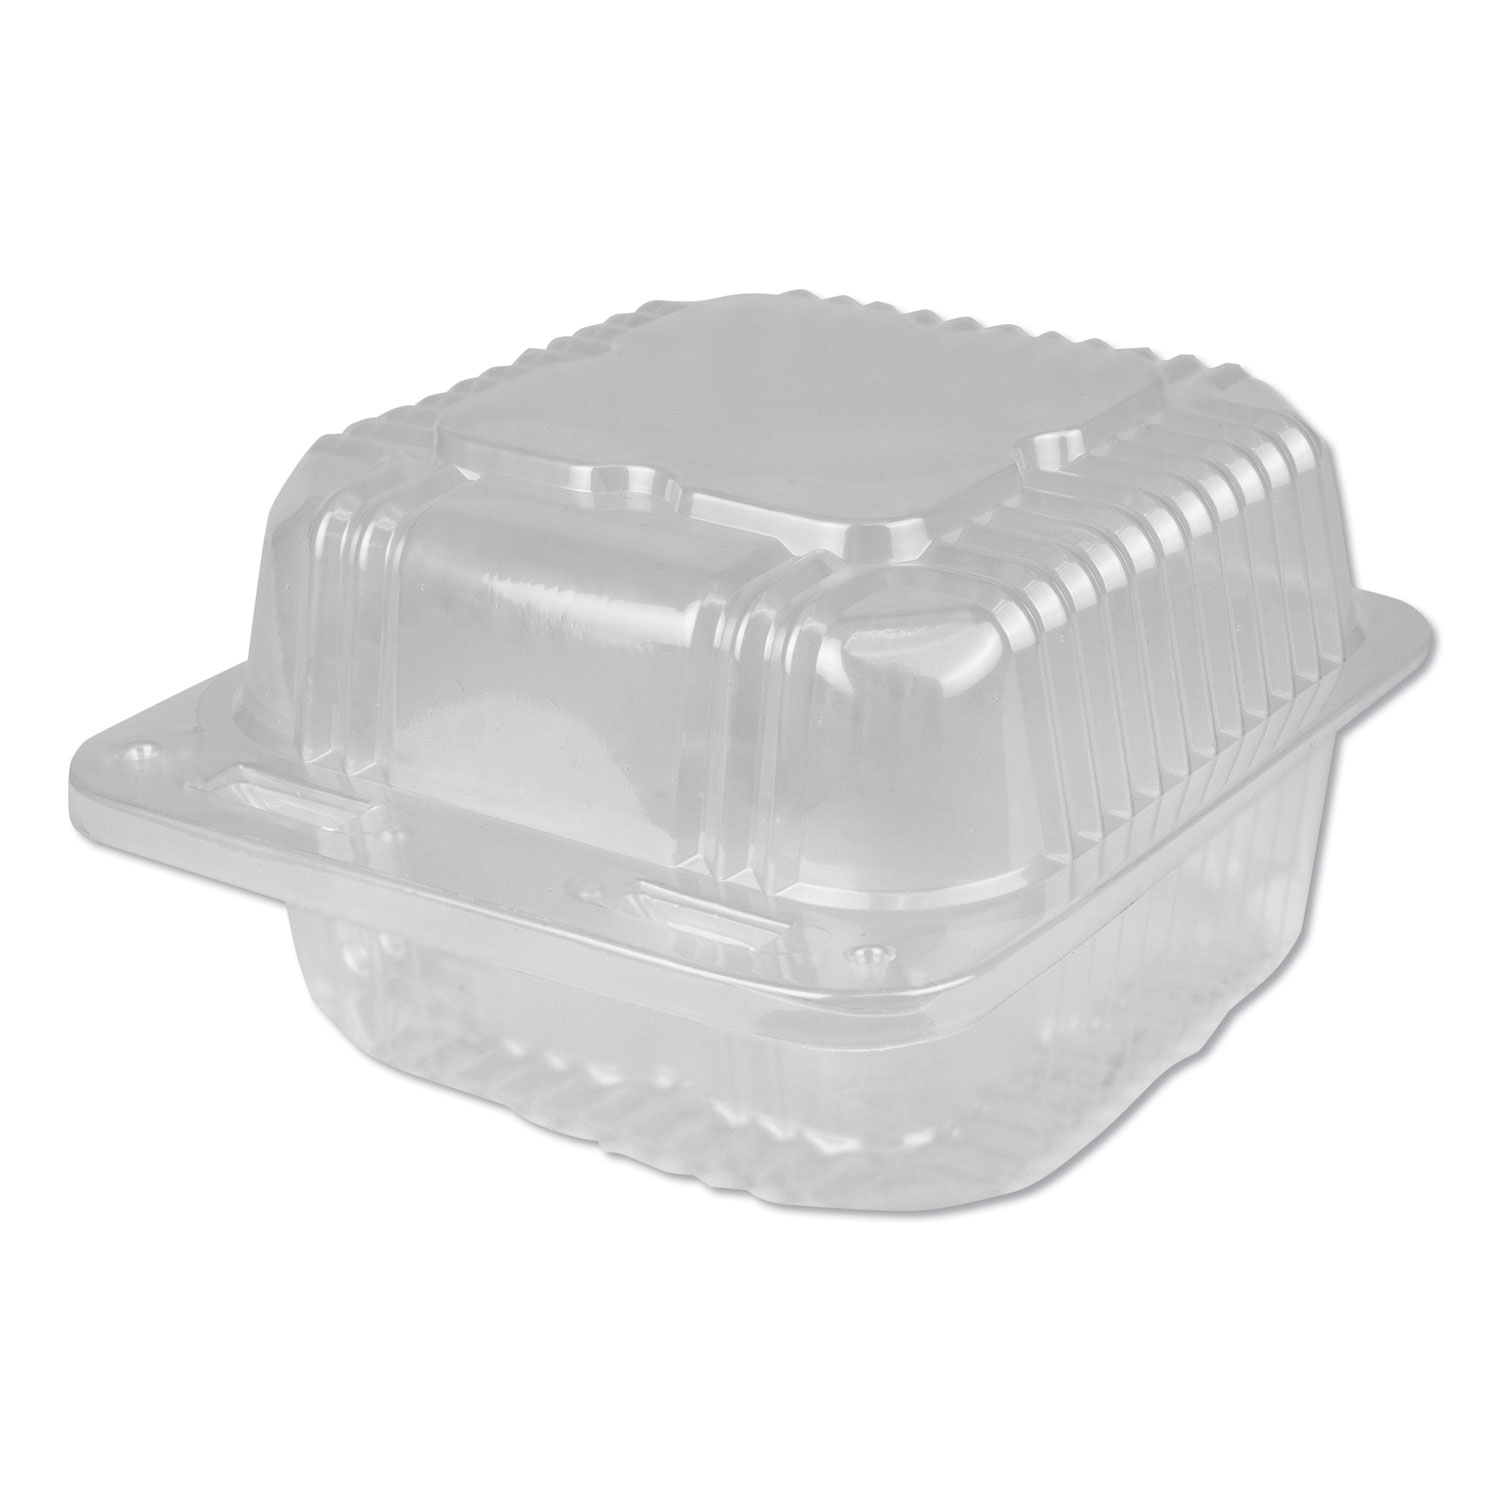 Rubbermaid Food Container 1 ea, Bakeware & Cookware